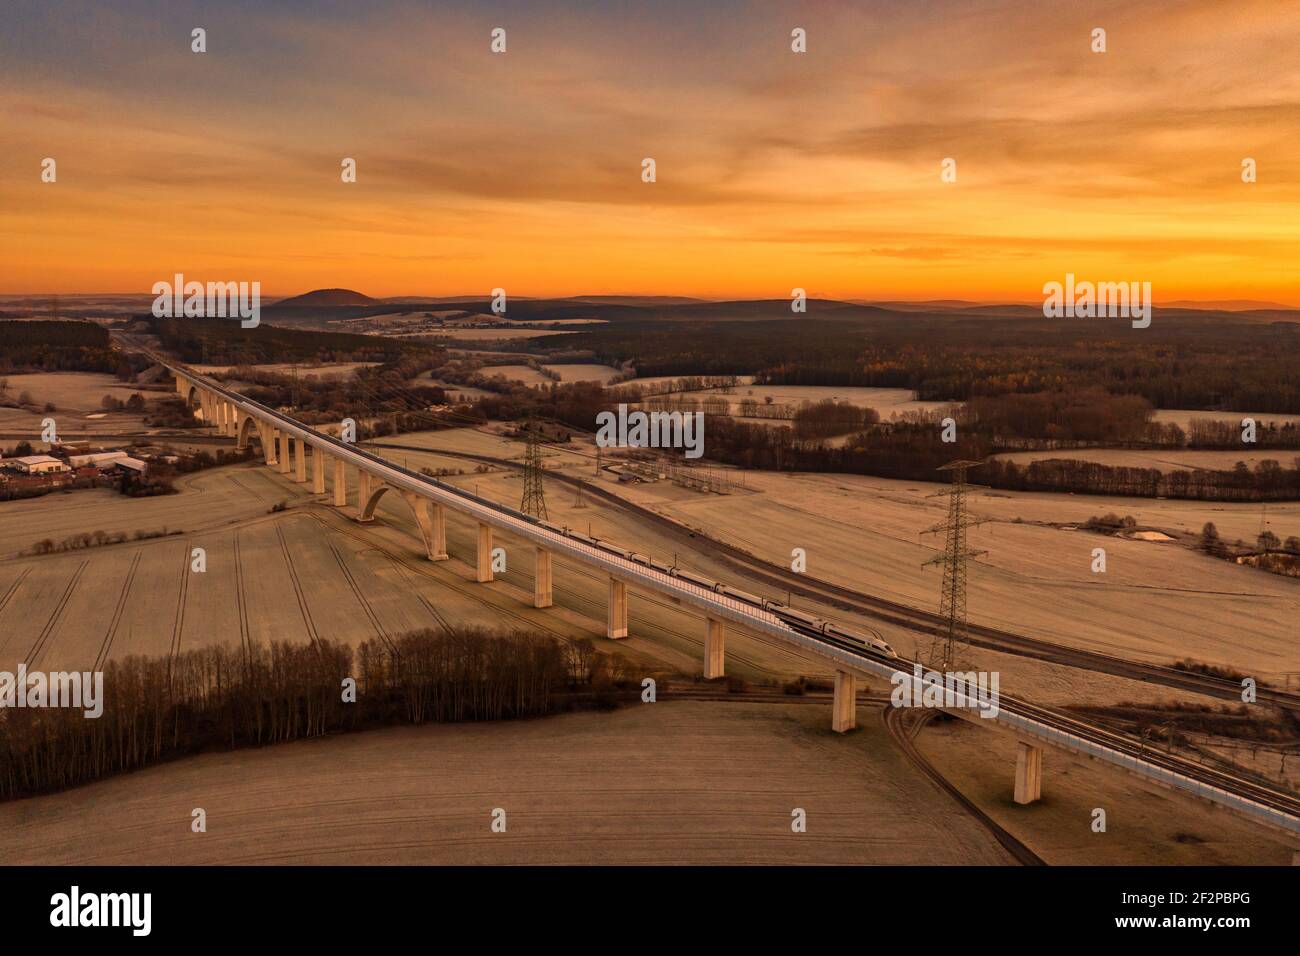 ICE, longest bridge in Thuringia (1681 m long, 48 m high), high-voltage pylons, power line, morning mood, aerial view Stock Photo